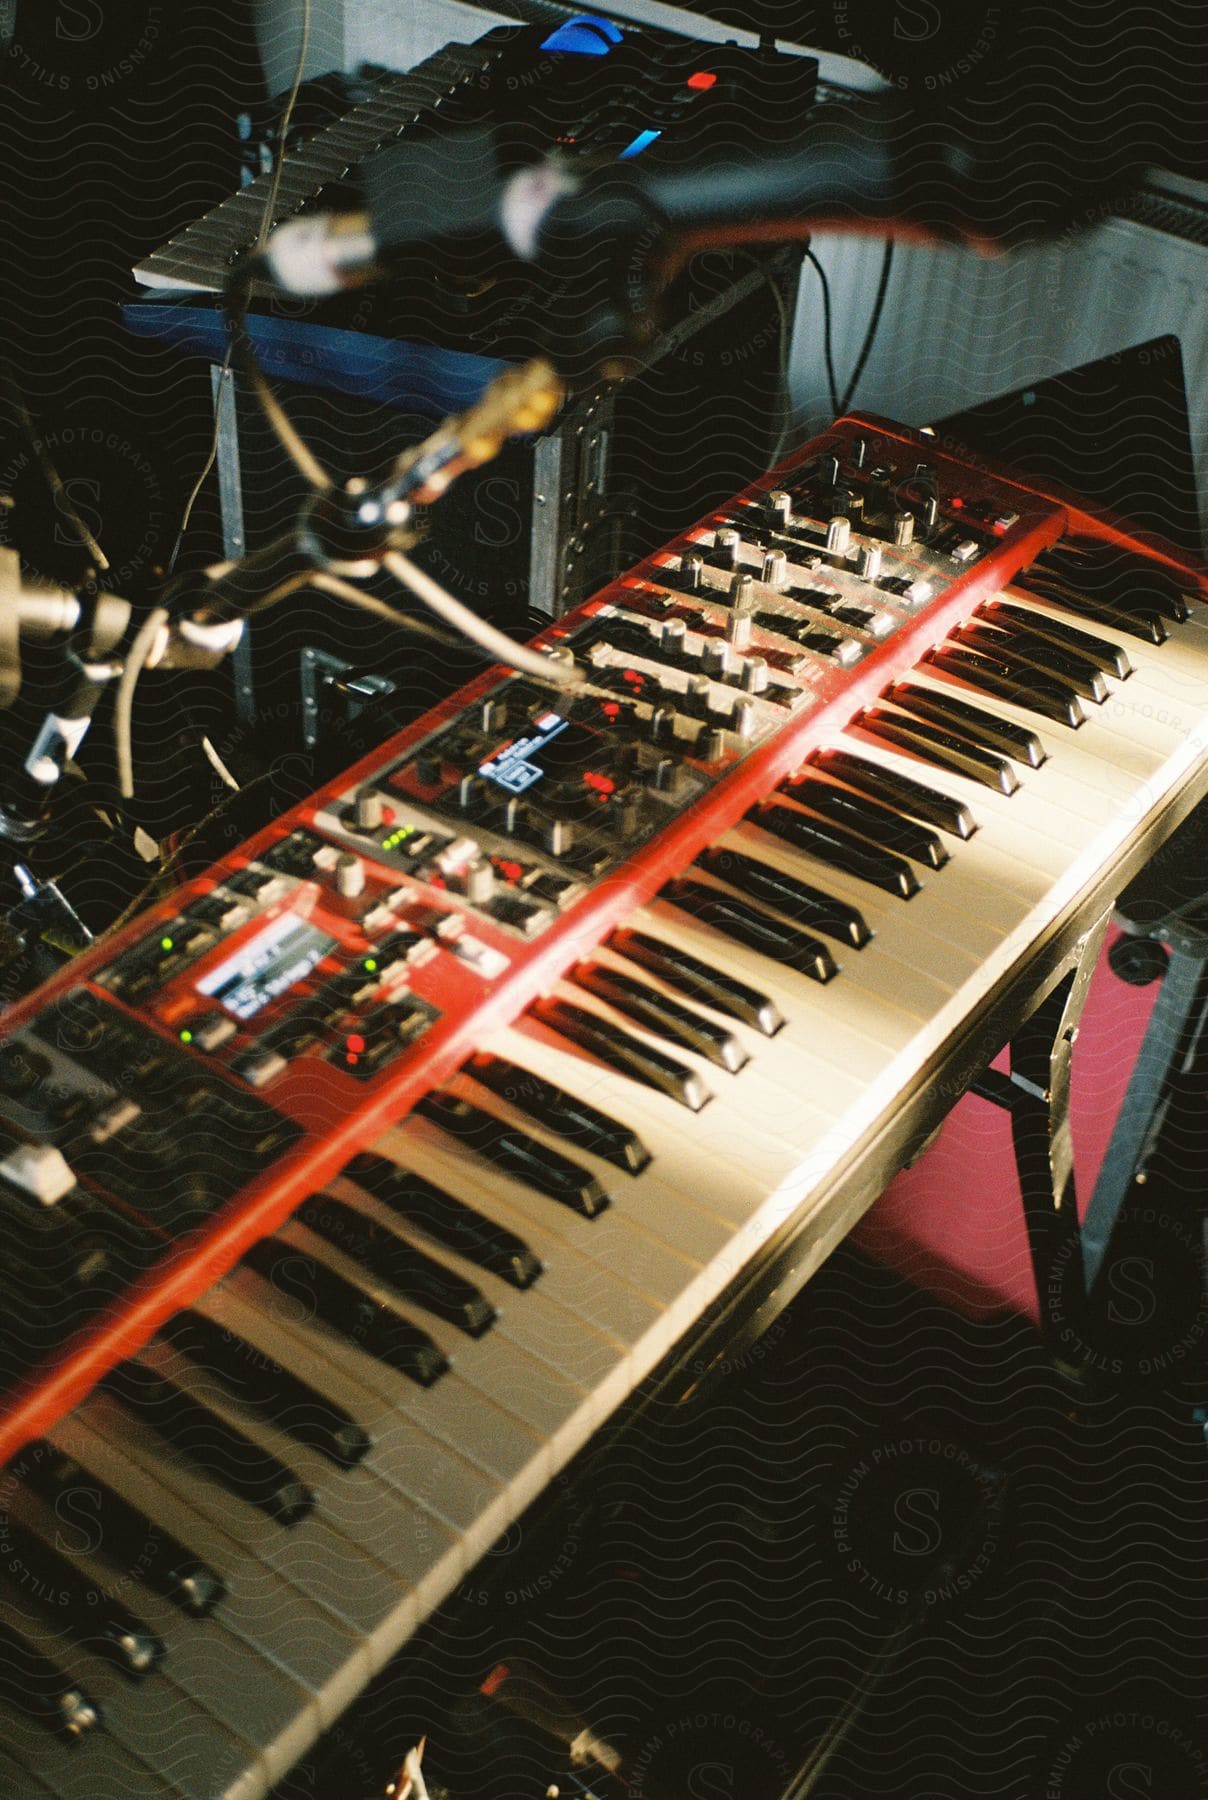 Electric keyboards and microphones are set up in a studio ready for a musician to play some tunes